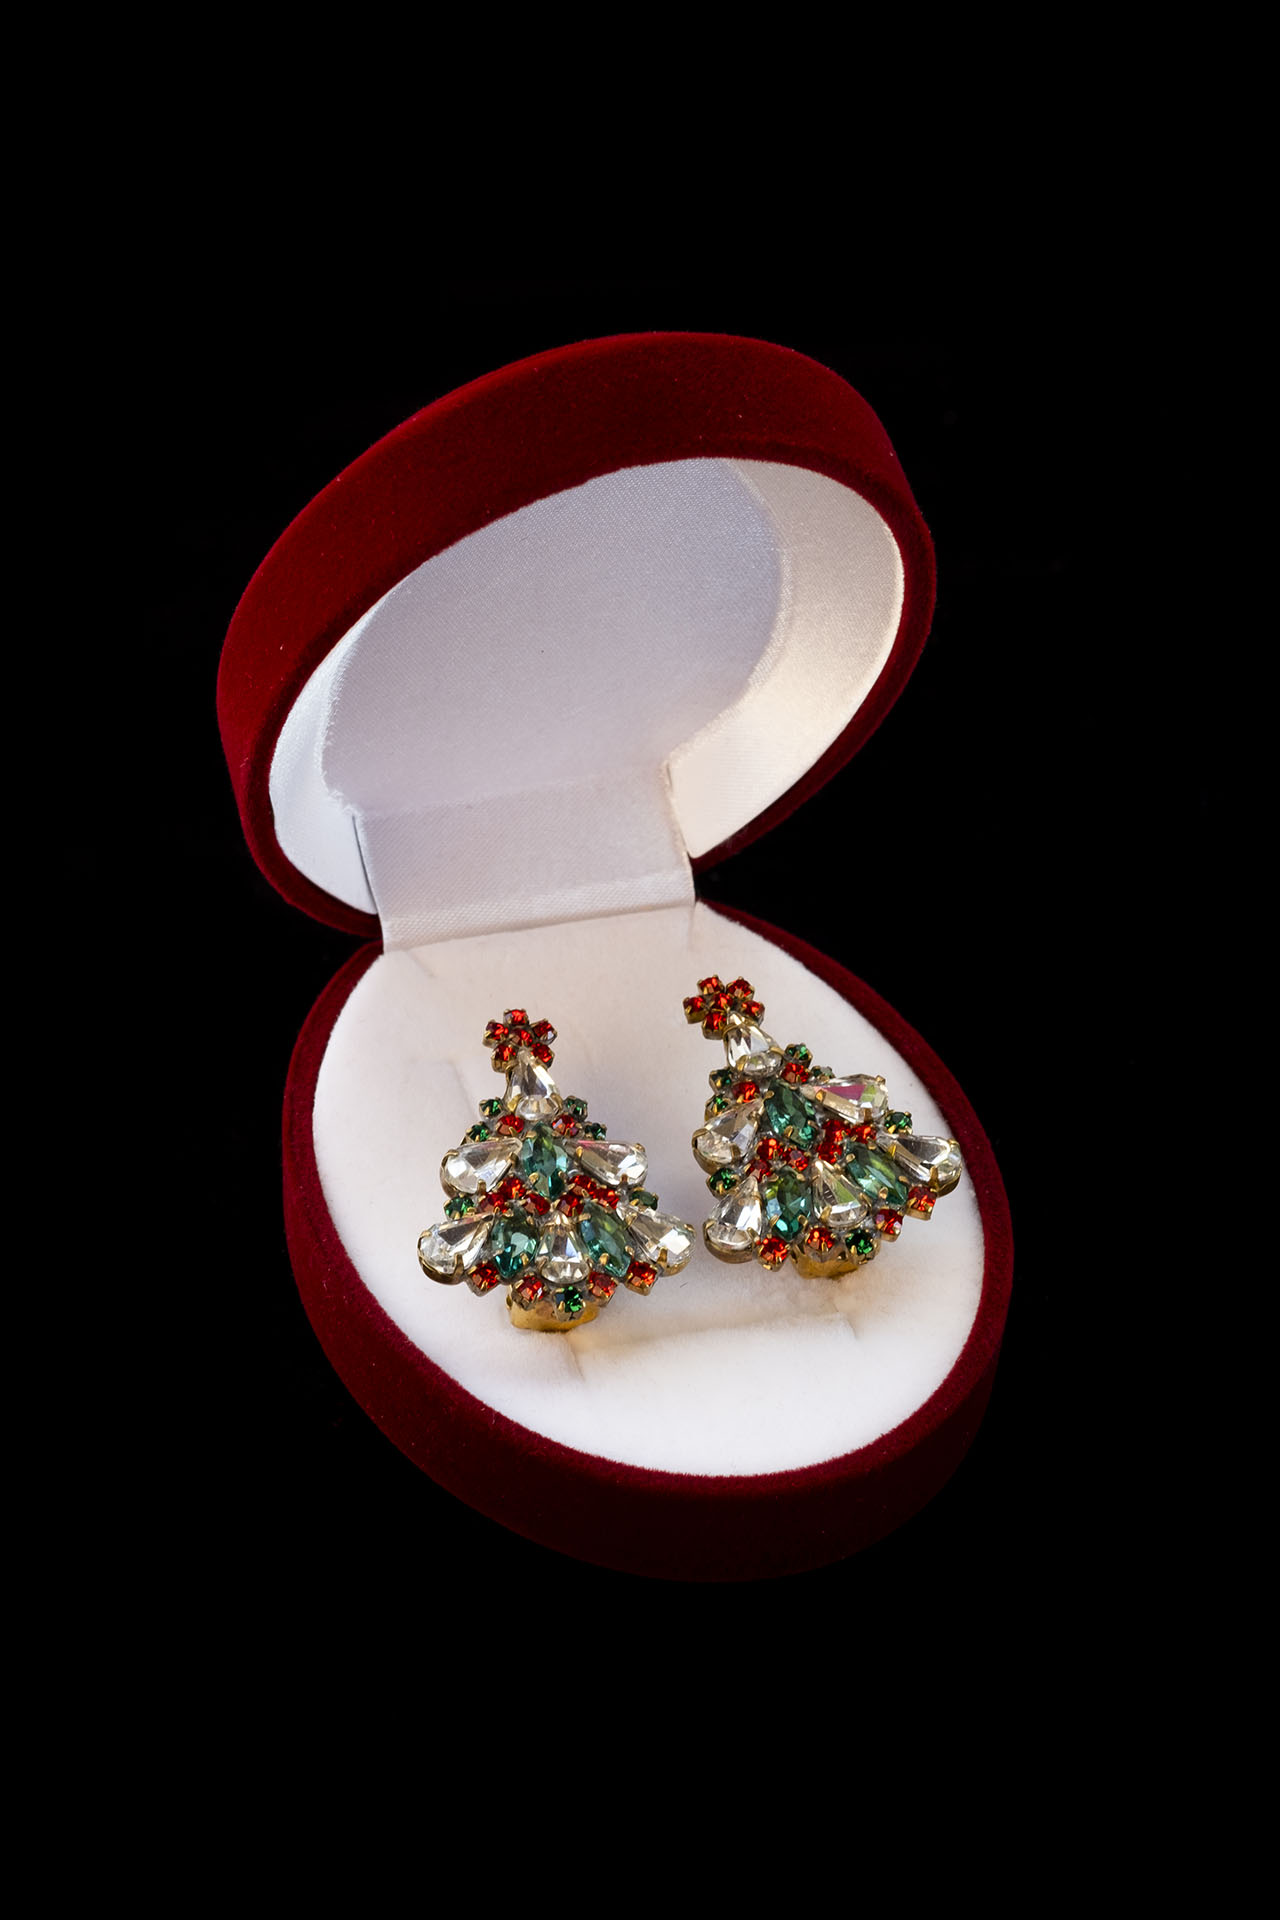 The magnificent star-topped Christmas tree clip-on earrings